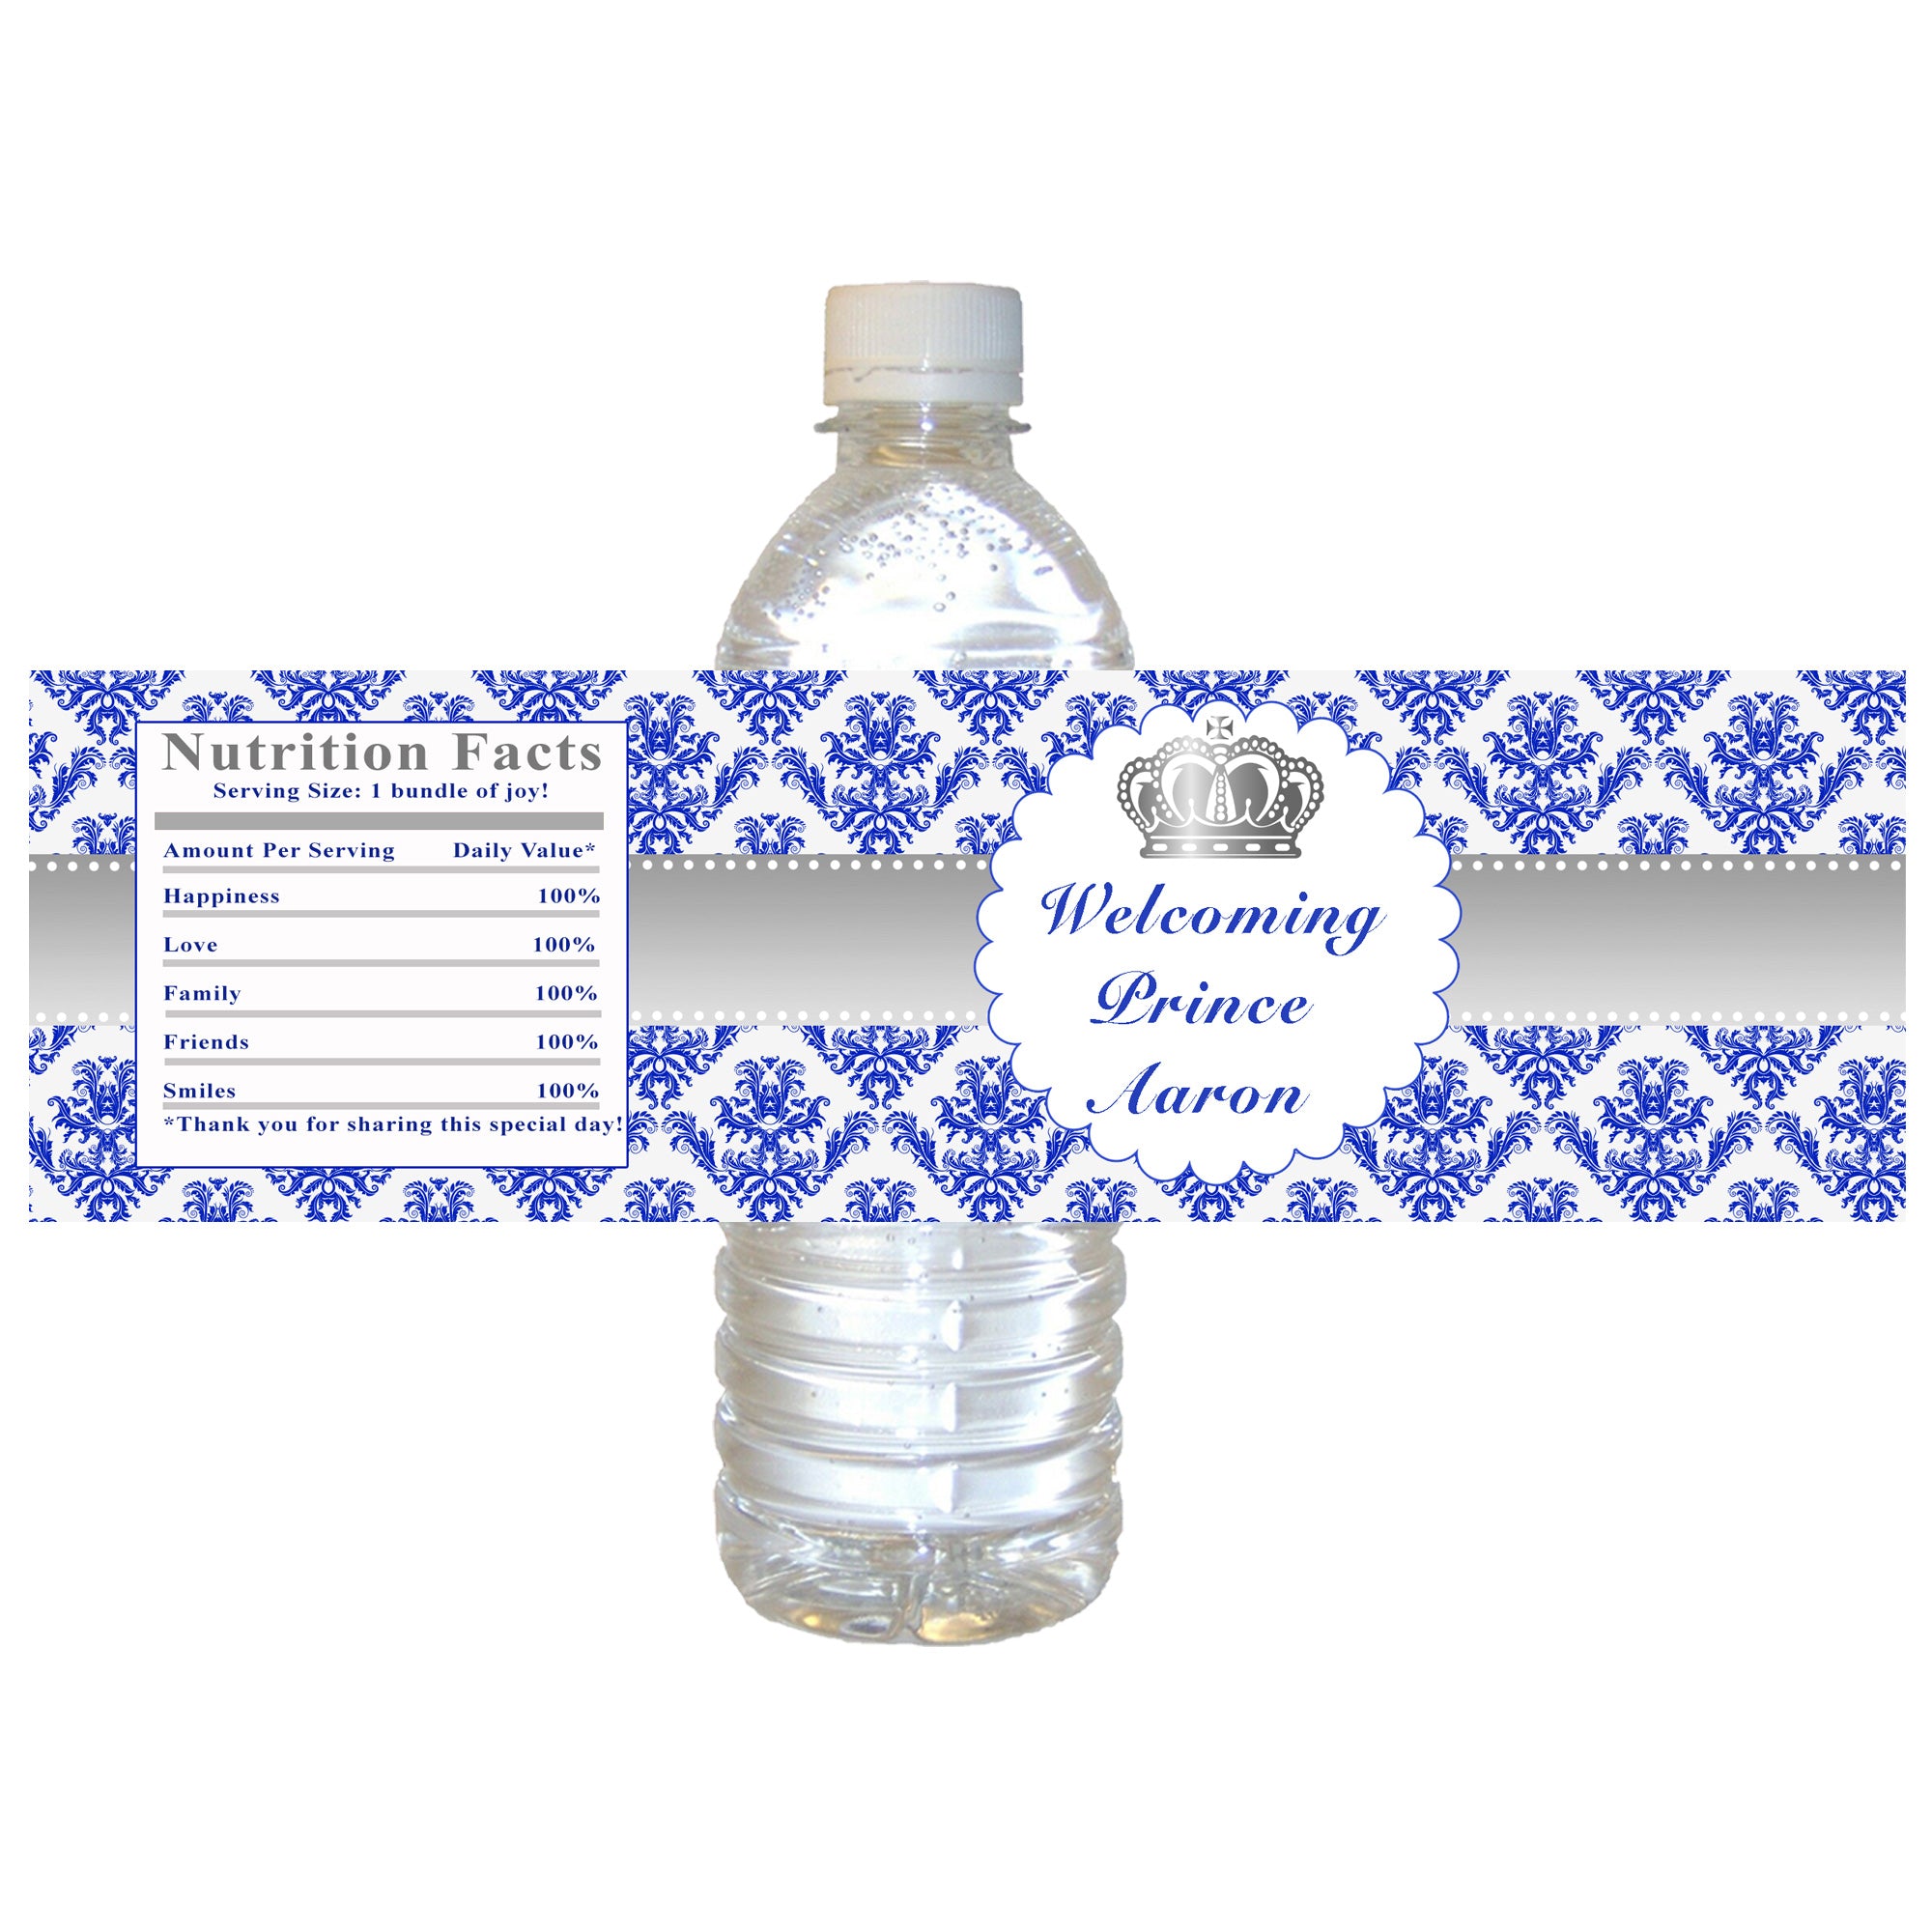 Prince silver royal blue bottle label birthday baby shower favors